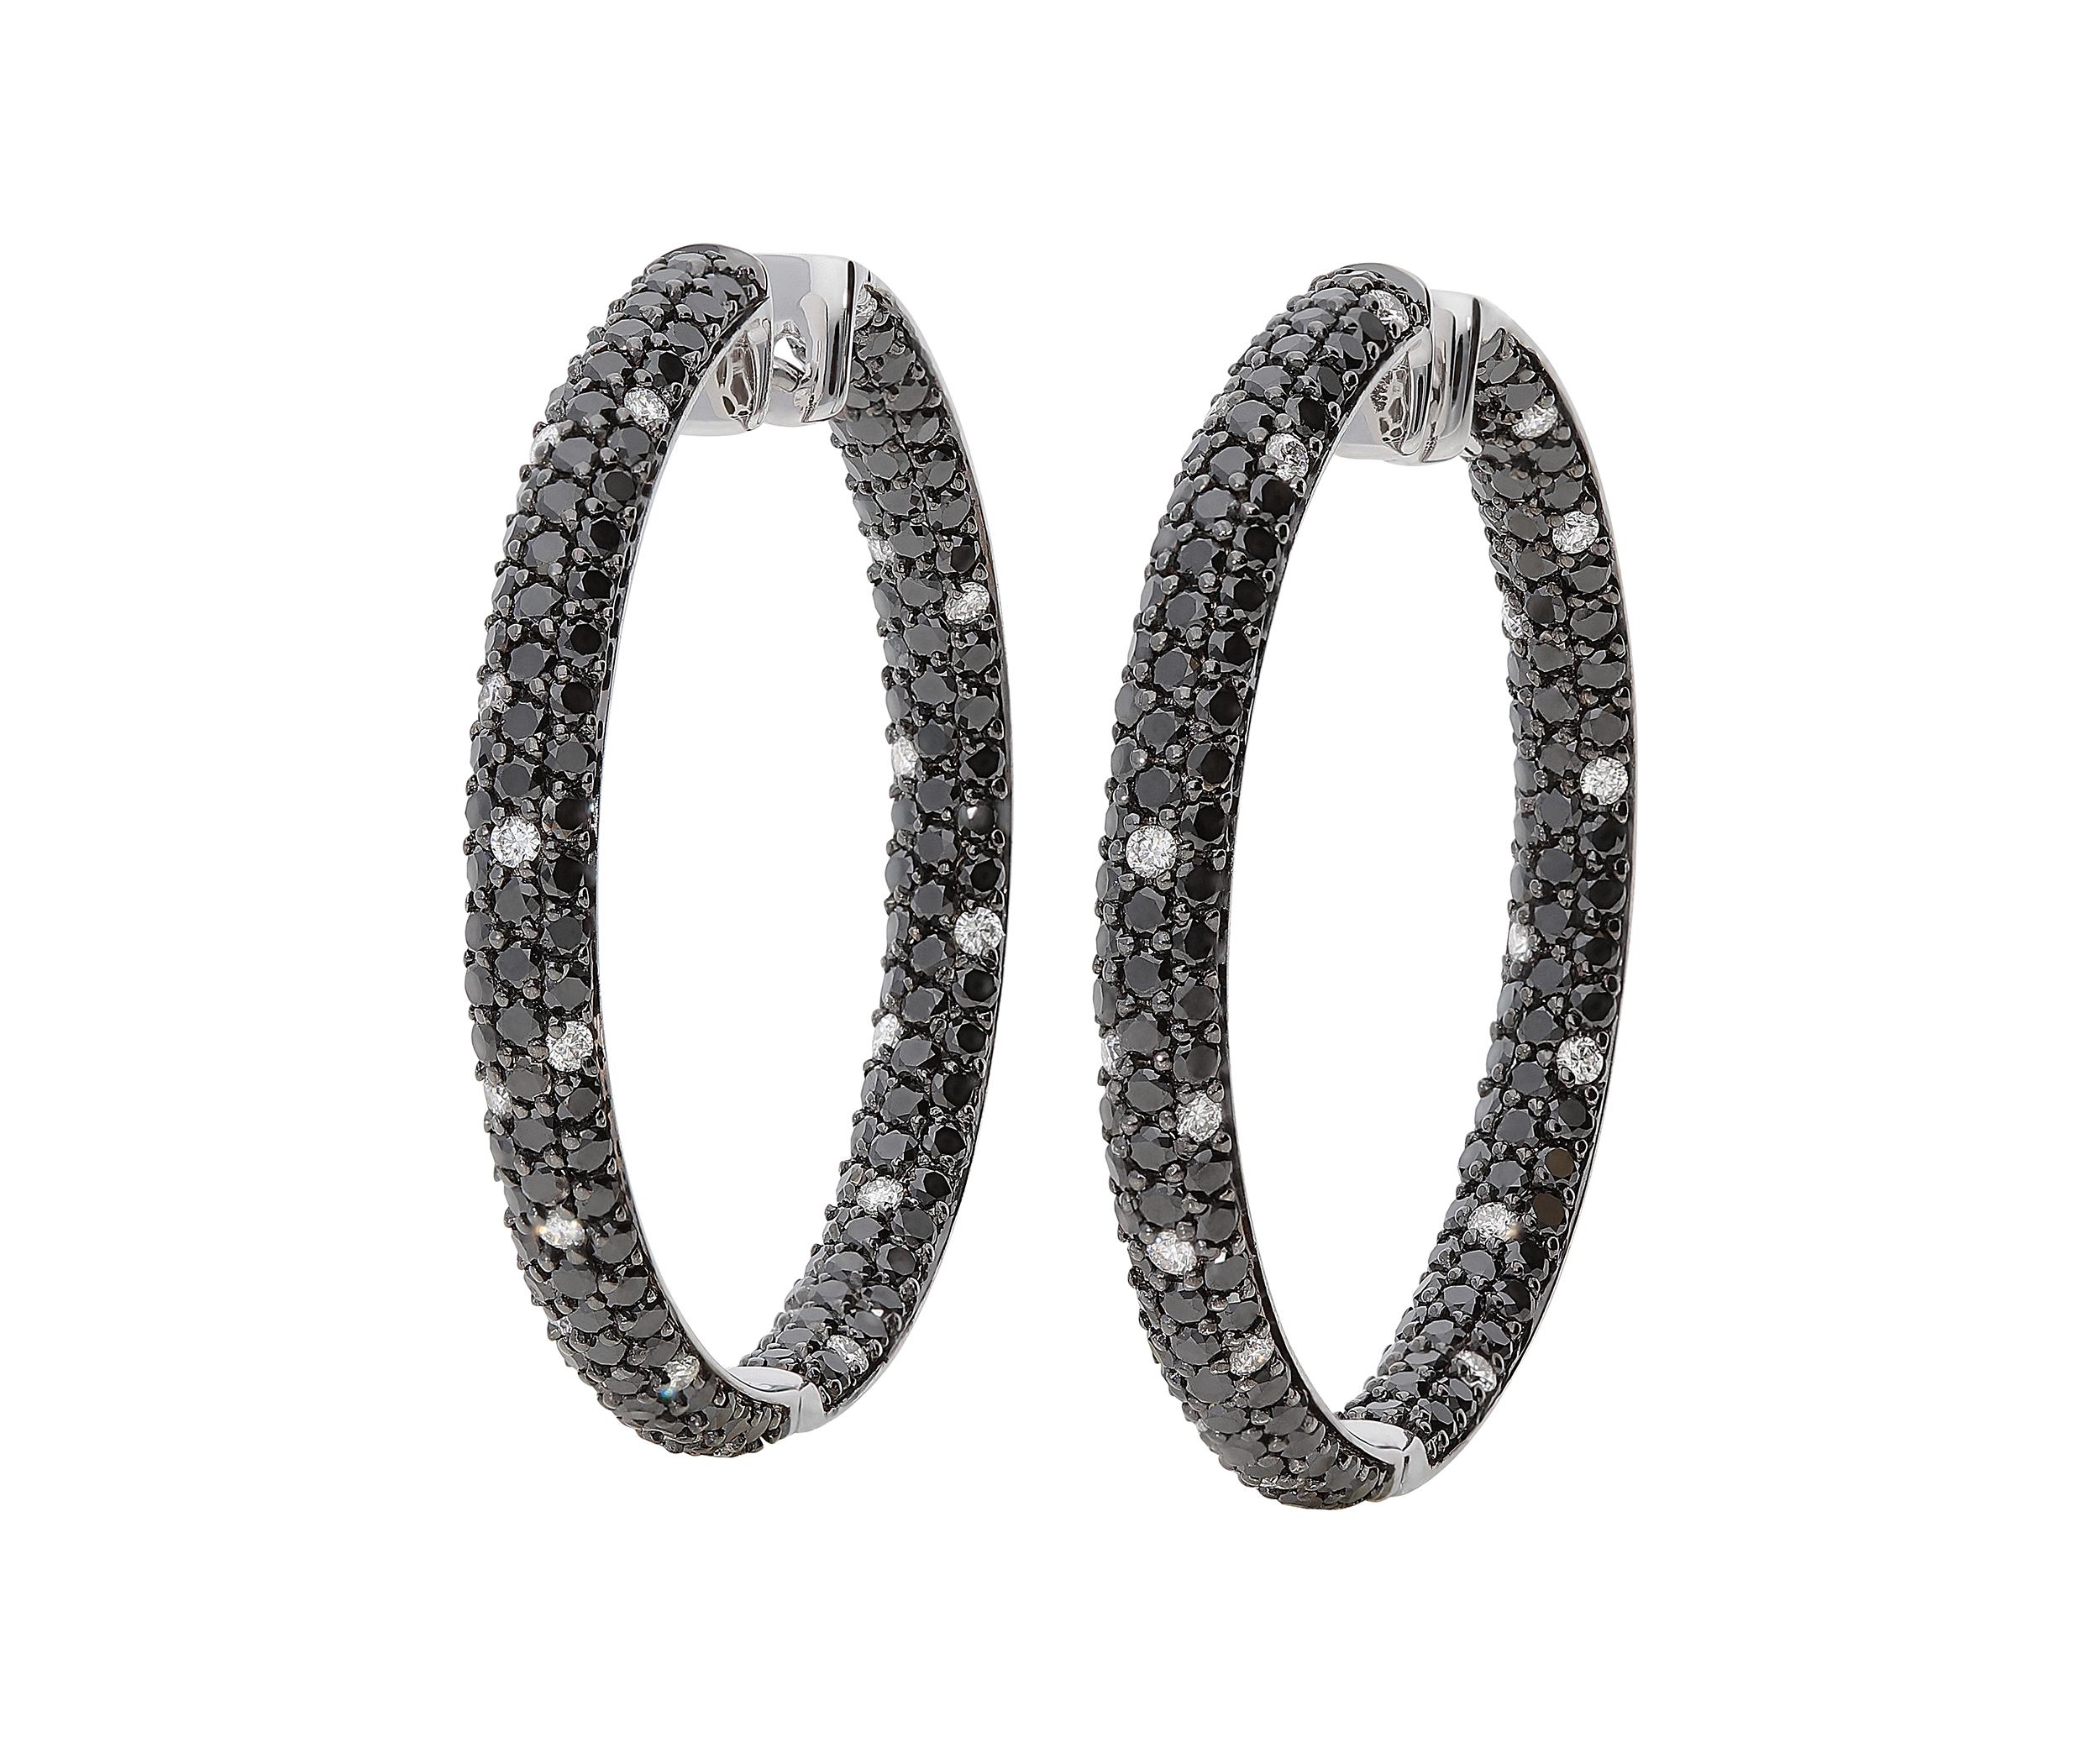 3.31 Black and 0.42 White GVS Diamonds 18 Karat White Gold Hoop Earrings In New Condition For Sale In Valenza, IT